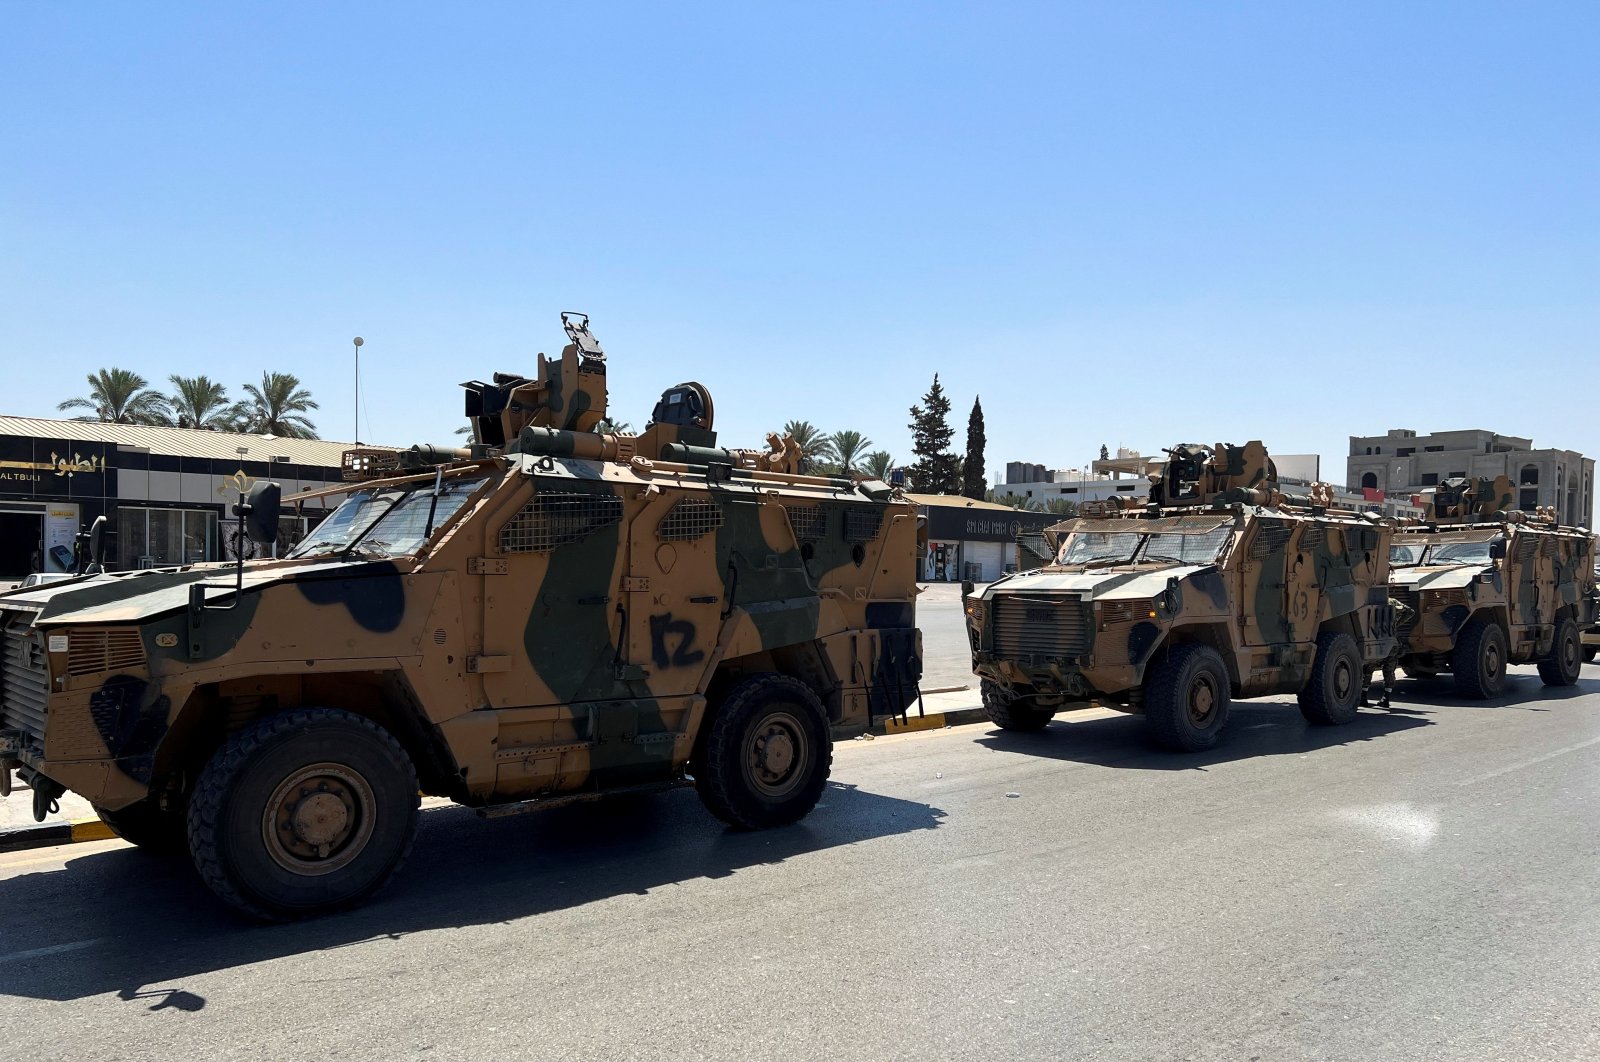 Military vehicles of the Libyan armed unit, 444 Brigade, backing the Government of National Unity (GNU) and Prime Minister Abdul Hamid Dbeibah, prepare to enter the area of clashes to resolve the conflict in Tripoli, Libya Aug. 27, 2022. (Reuters File Photo)